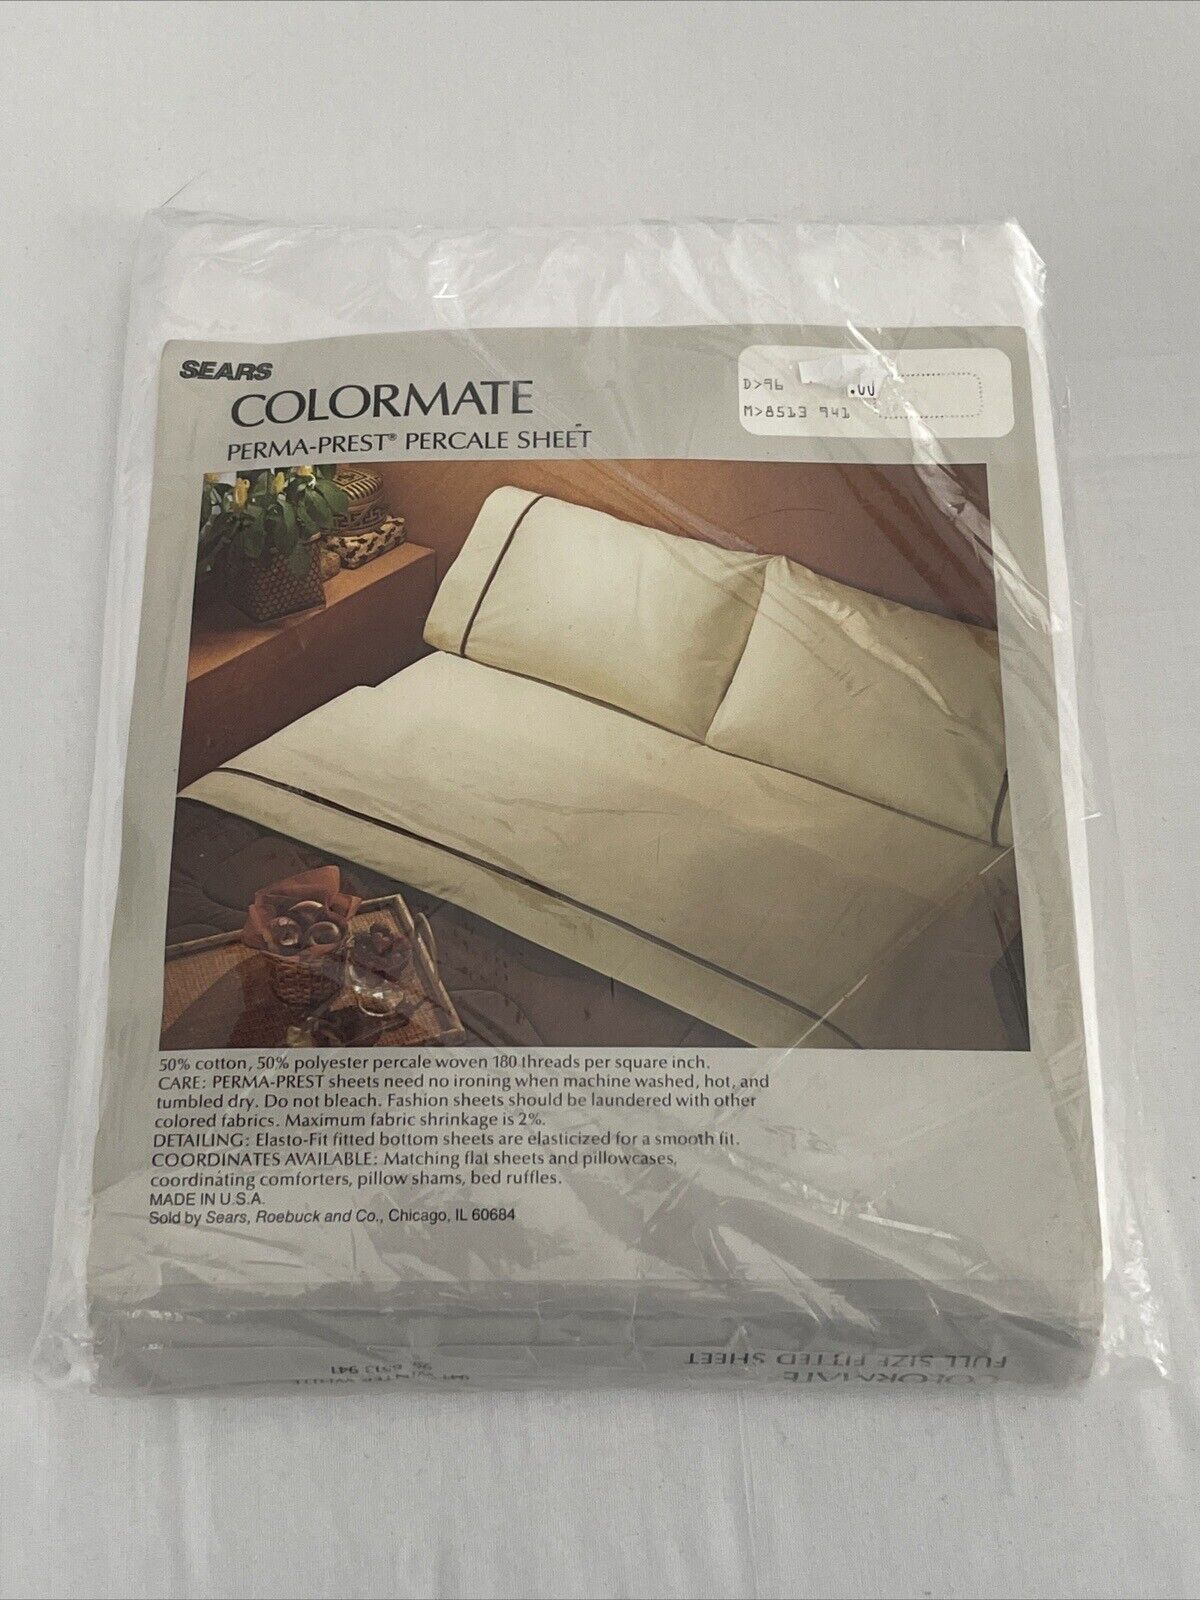 NOS Vintage Sears Colormate Perma-Prest Percale Sheet Full Size 54x75 In 1123